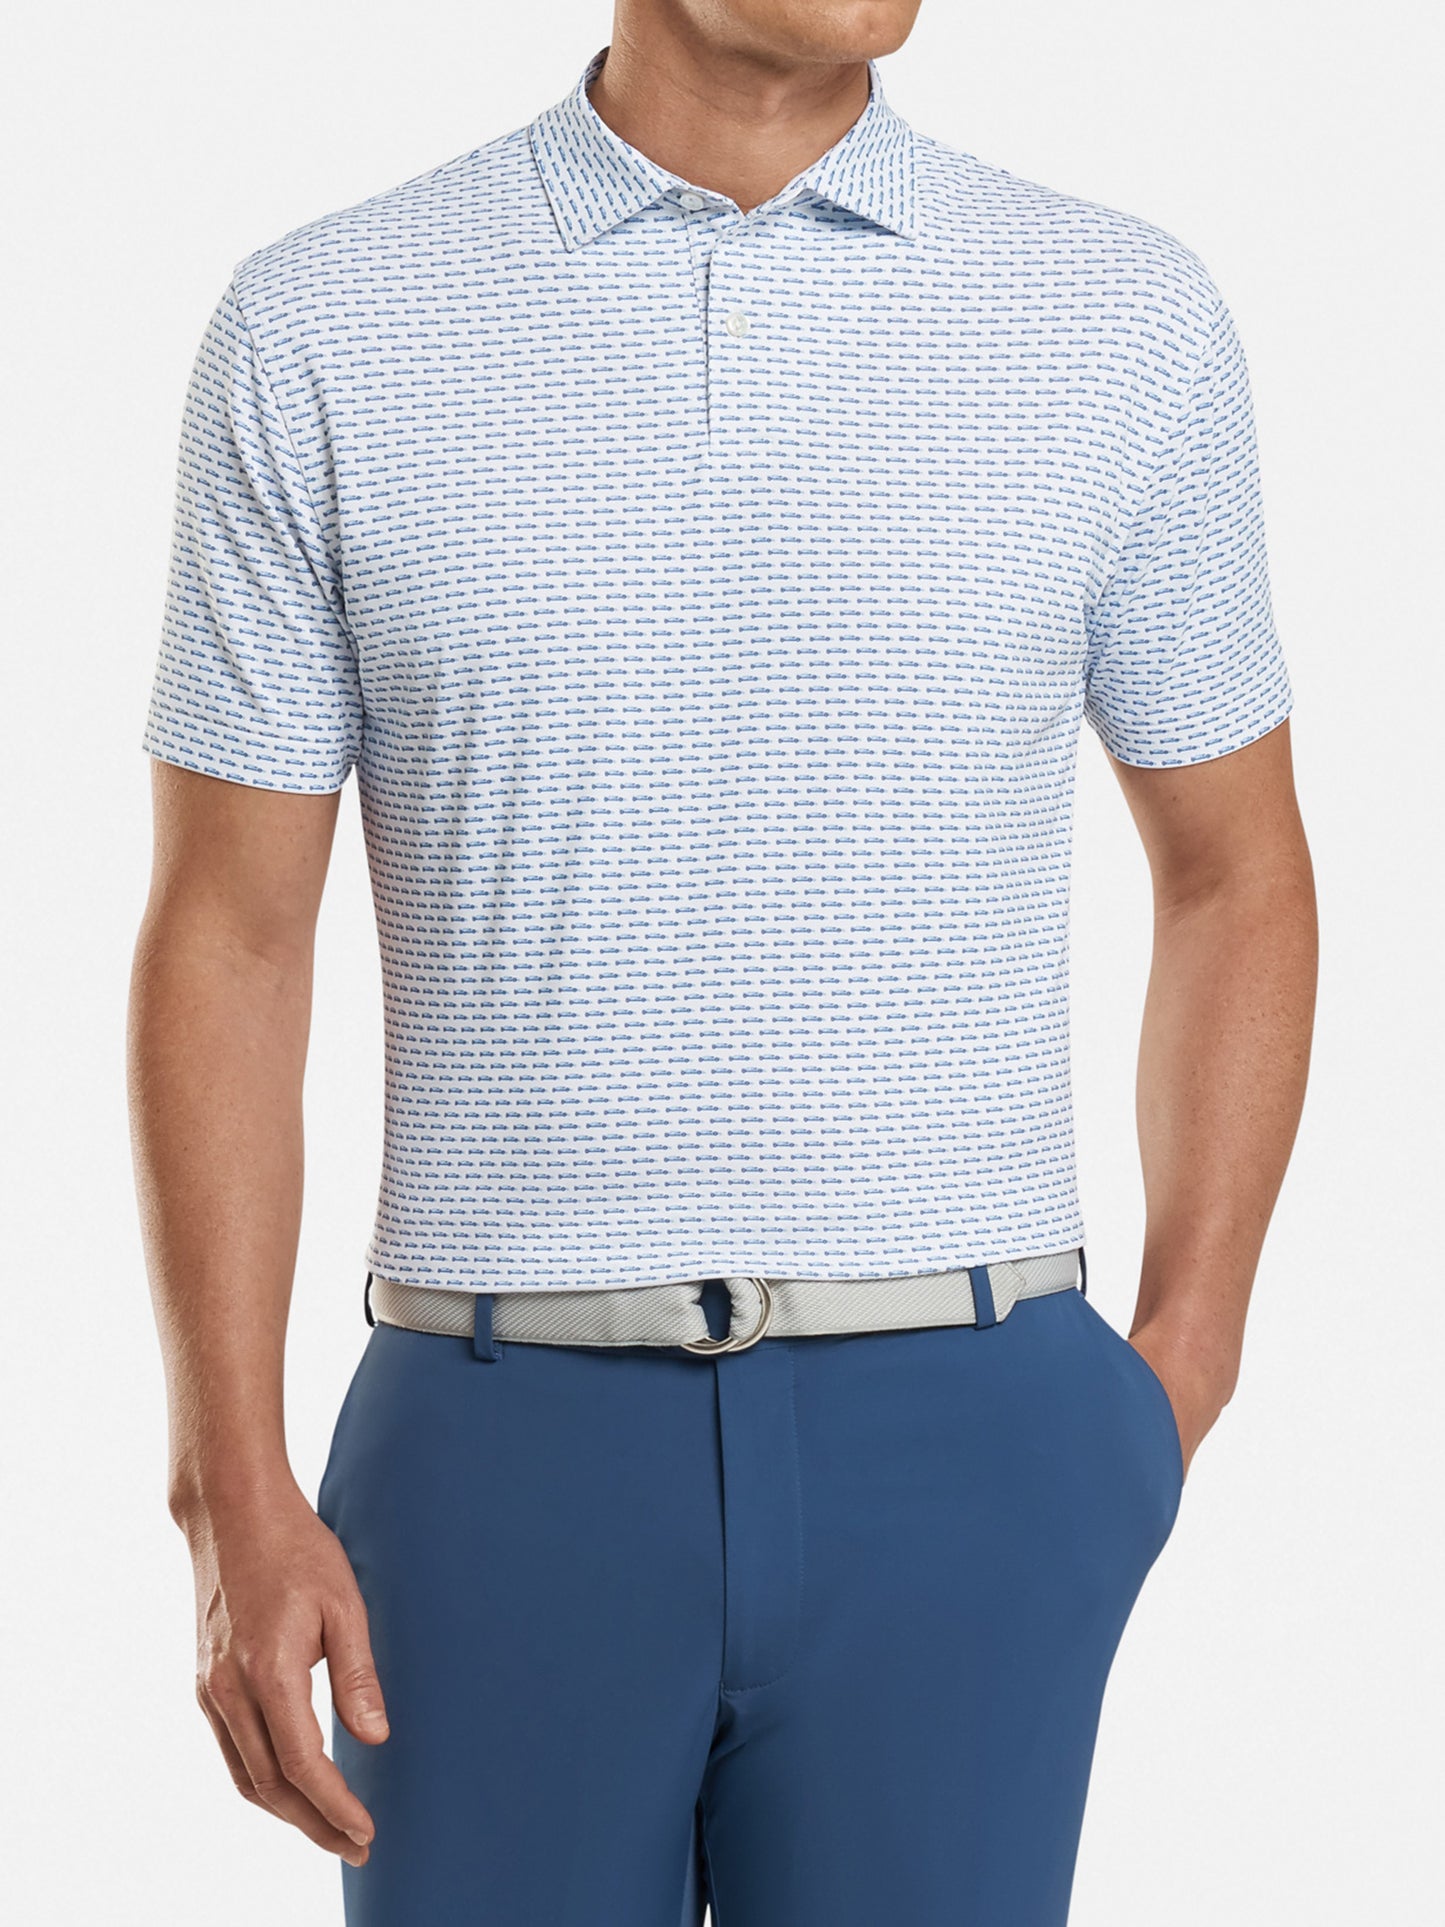 Peter Millar Men's Crown Crafted Blues Printed Open Wheel Performance Polo